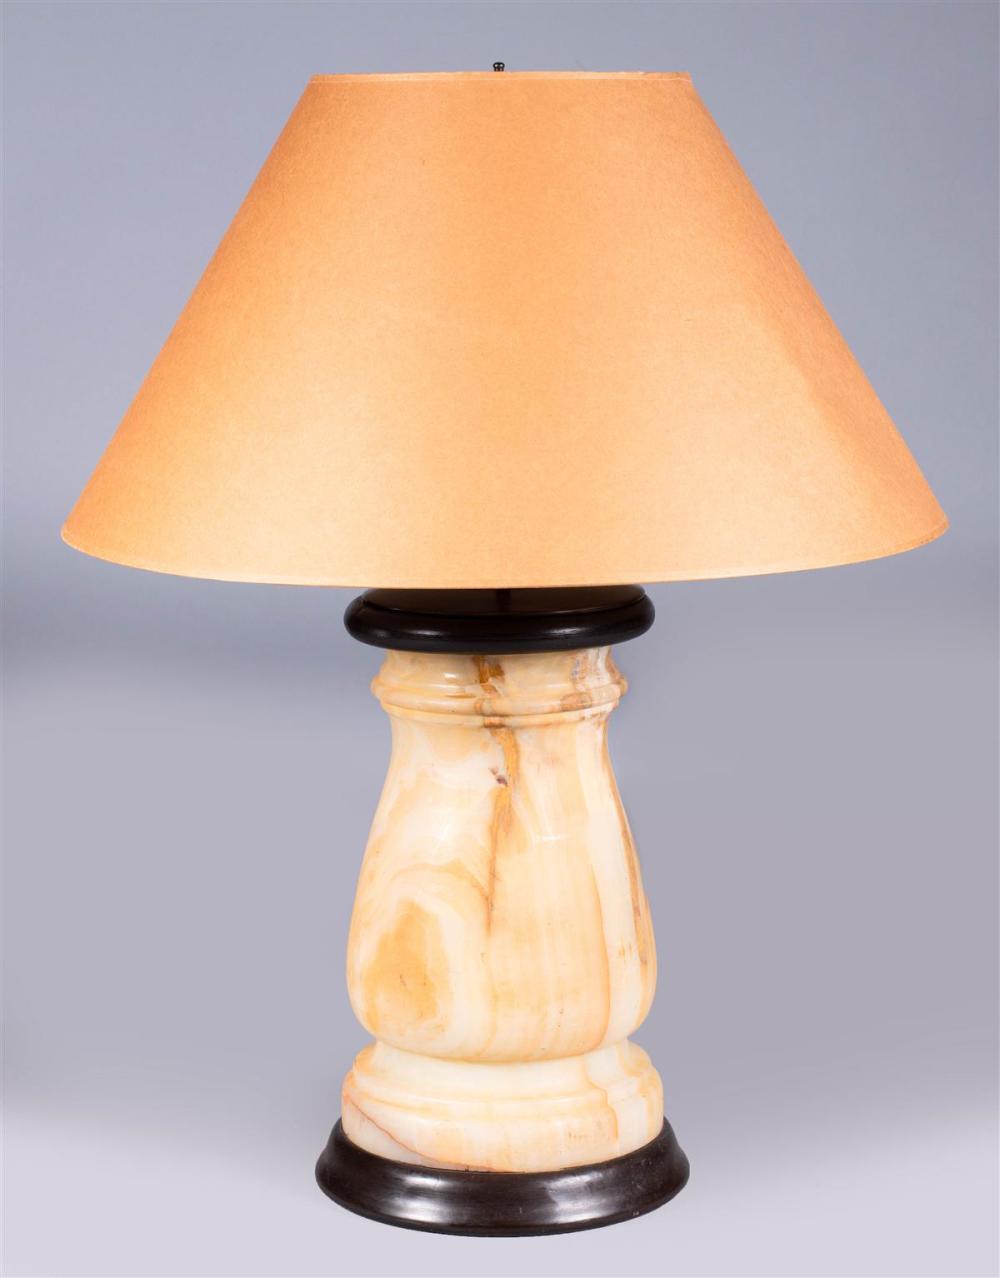 NEOCLASSICAL STYLE ONYX LAMP LATE 33c1d1